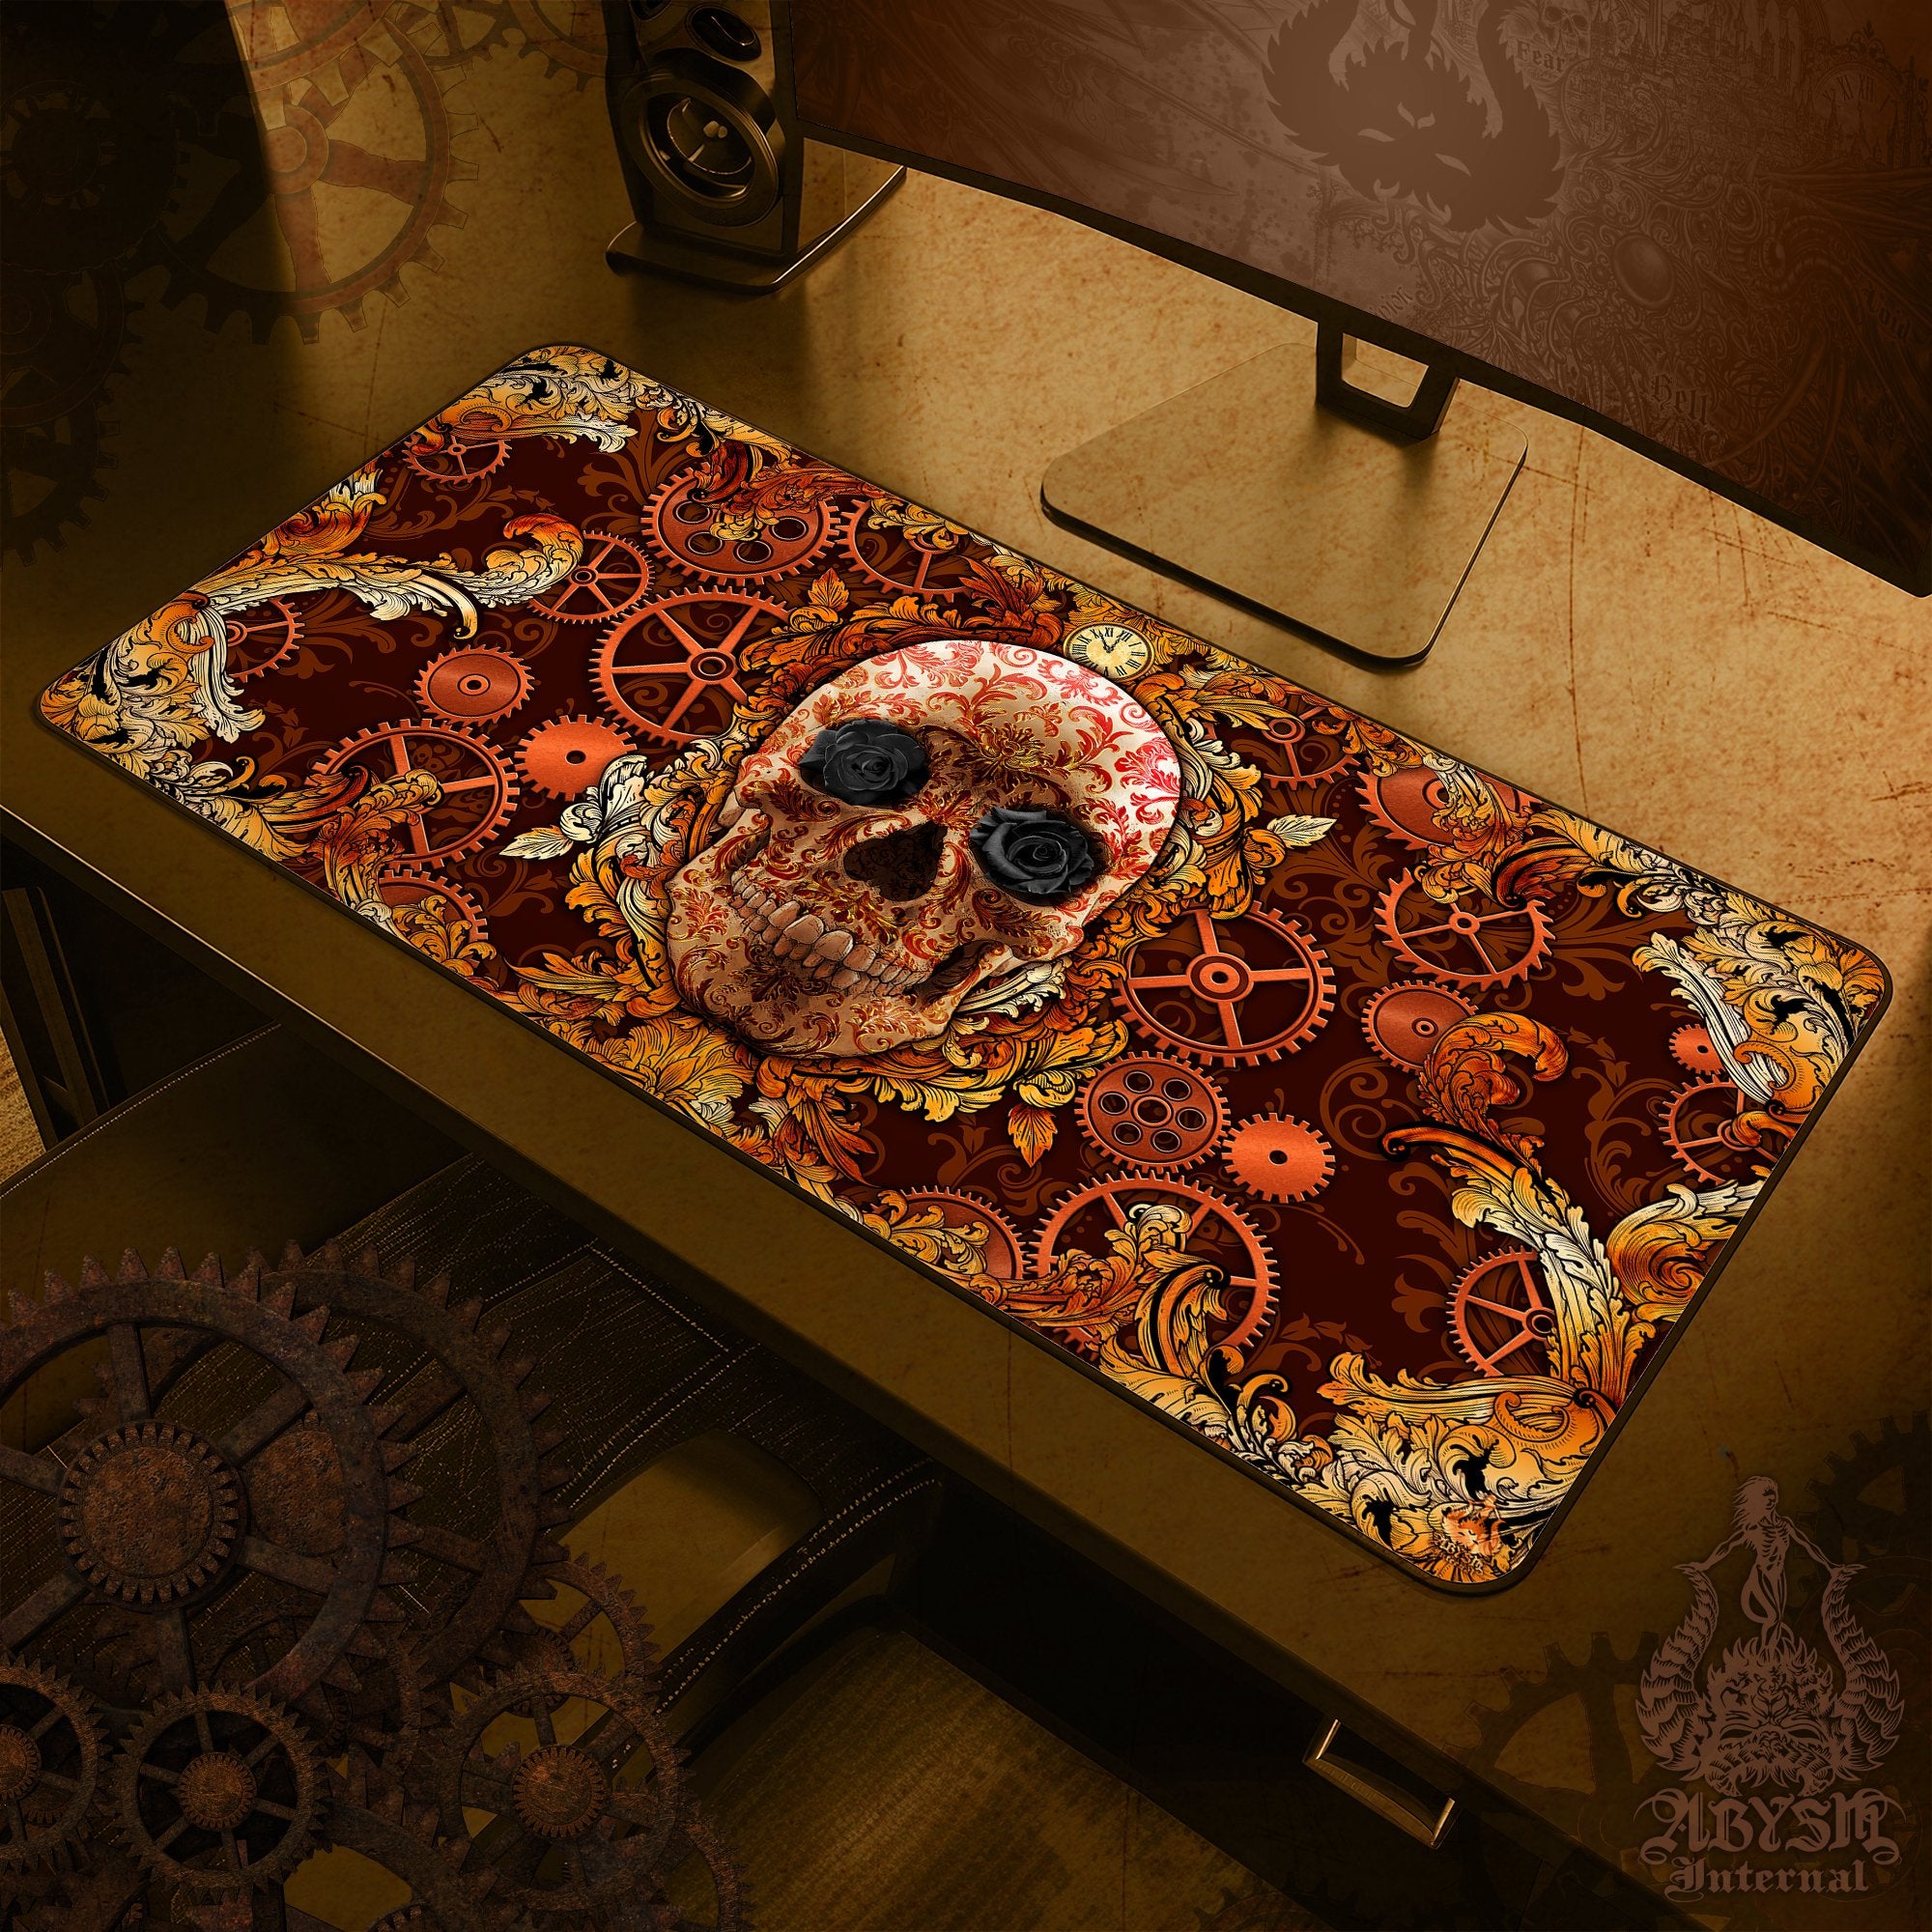 Steampunk Gaming Mouse Pad, Skull Desk Mat, Ornamented Table Protector Cover, Gears Workpad, Baroque Art Print - Abysm Internal